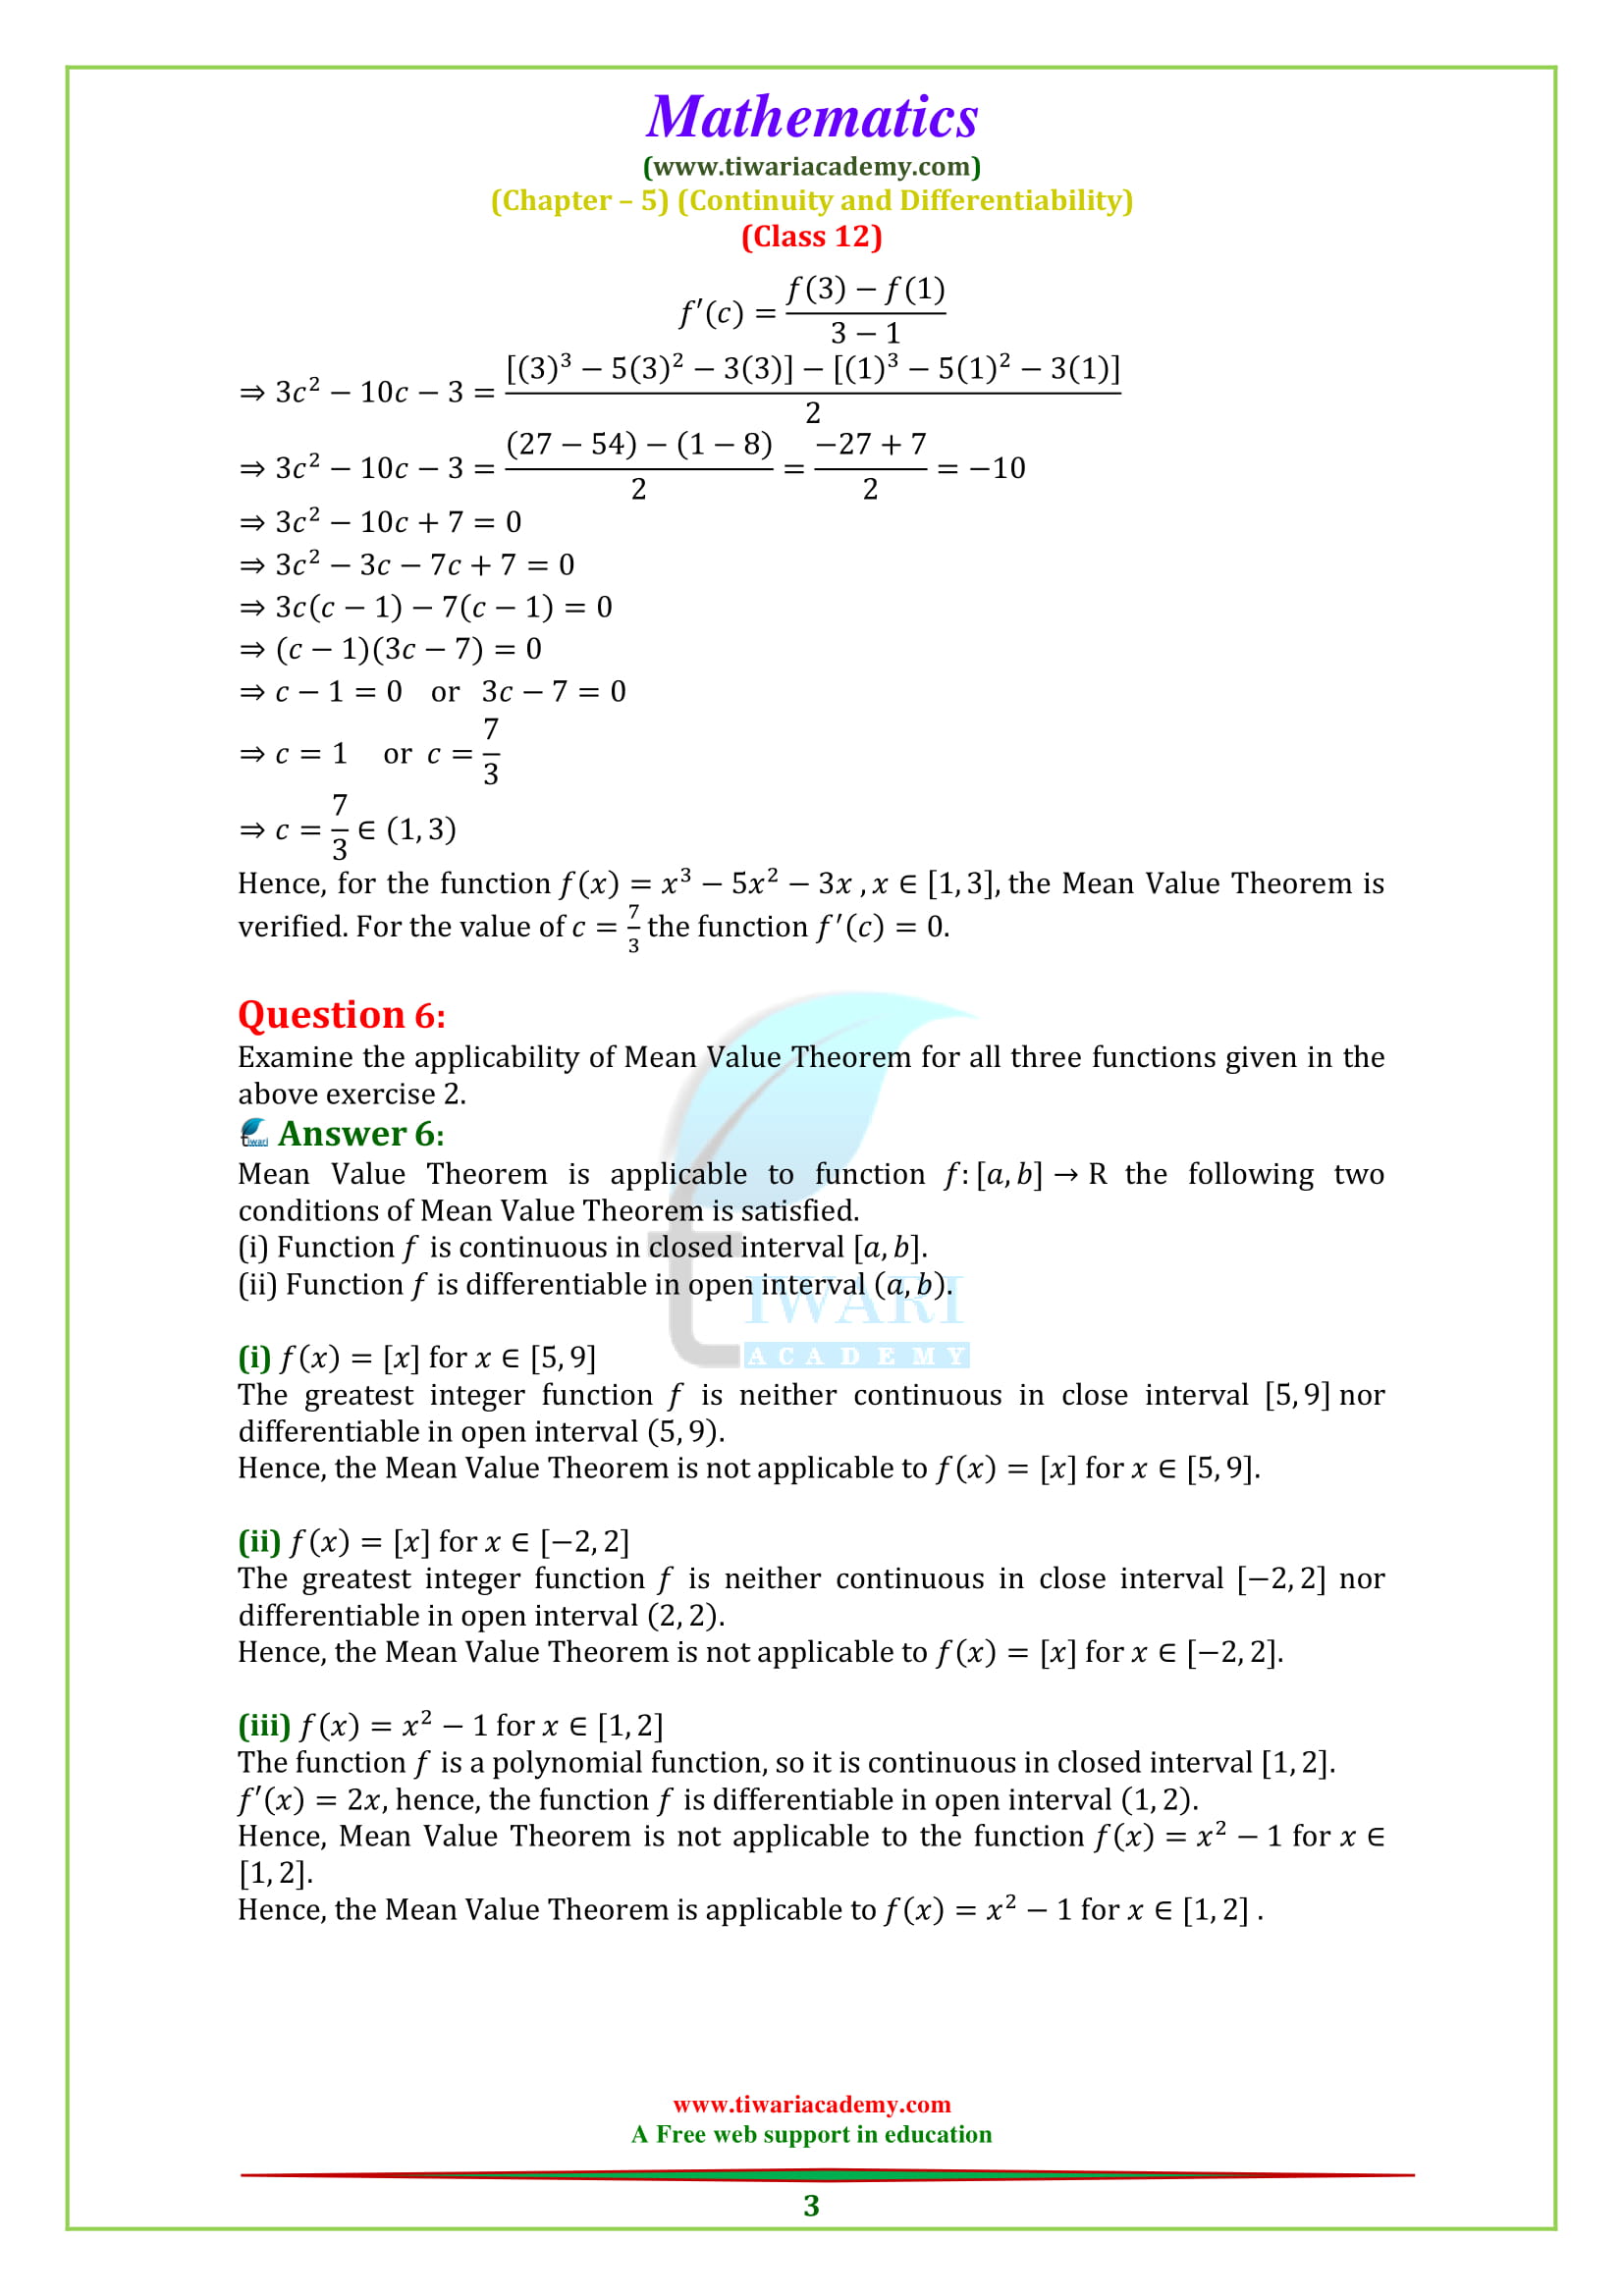 NCERT Solutions for Class 12 Maths Chapter 5 Exercise 5.8 for CBSE and UP Board updated for 2018-19